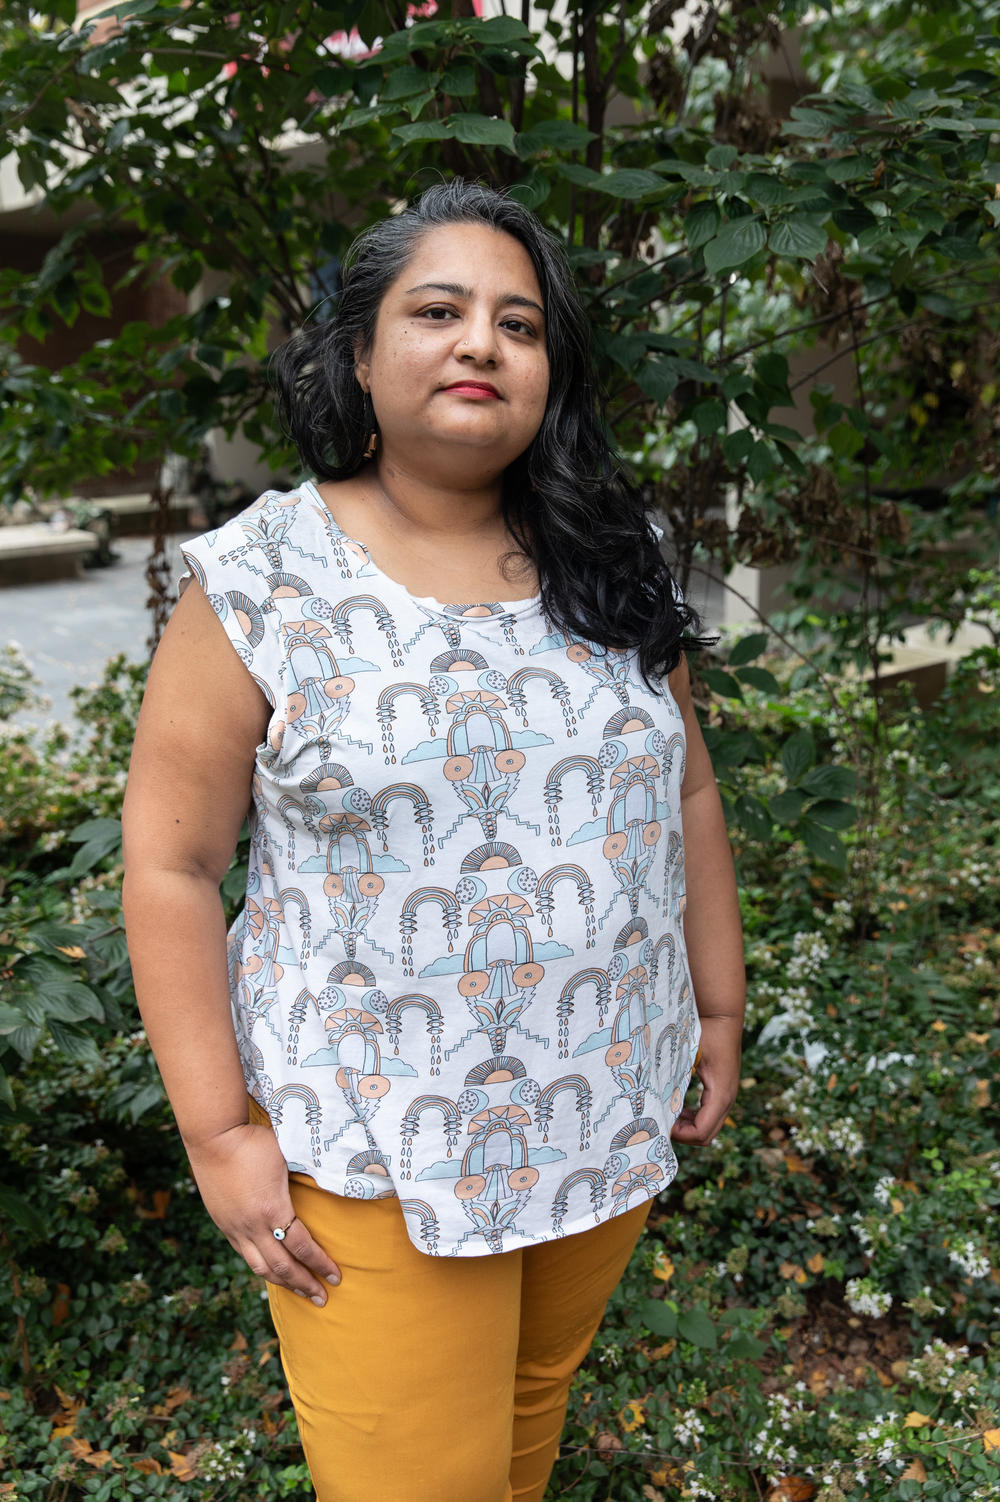 Roohi Choudhry, an attendee at Philly FatCon, said she didn't always use the word 'fat' for herself and that it took her years to seek fat liberation. Now, she's ready to.